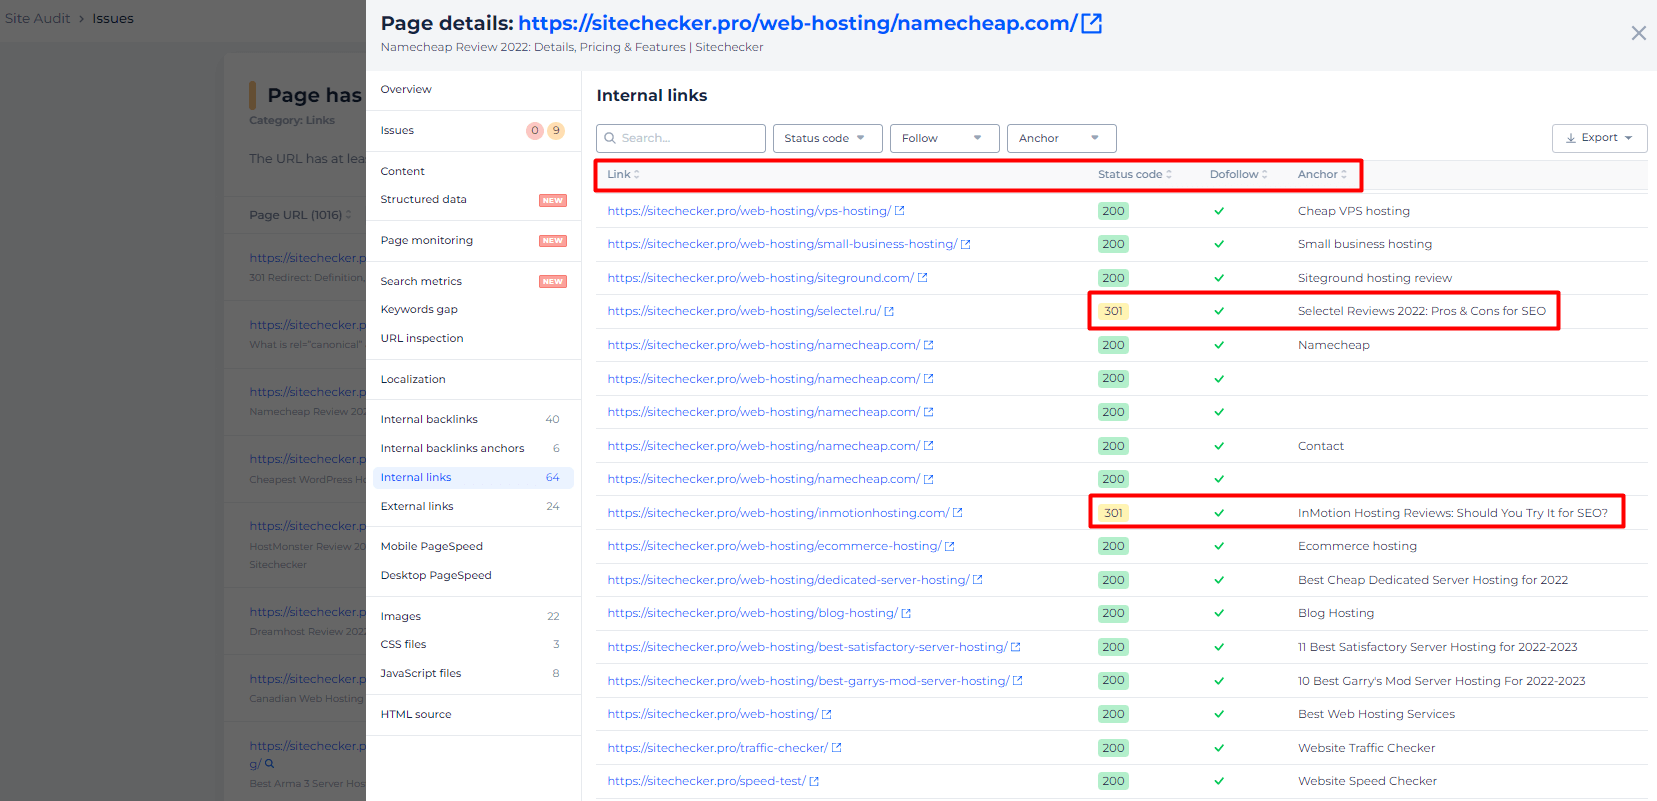 Redirected Links on Page